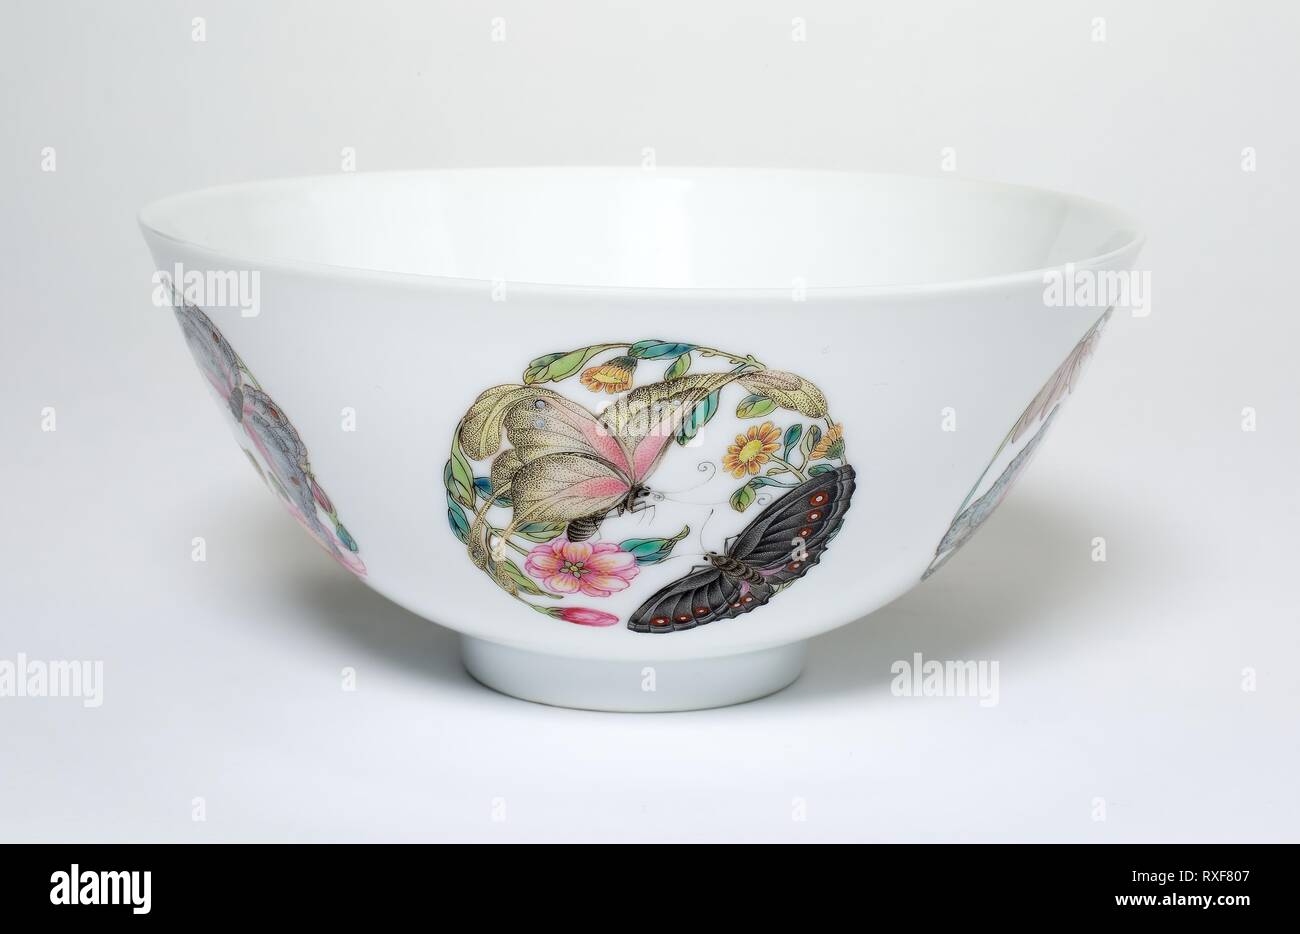 Bowl with Medallions of Butterflies, Peonies, Chrysanthemums, Peaches, Plums and Orchids. China. Date: 1723-1735. Dimensions: H. 6.7 cm (2 5/8 in.); diam. 14.4 cm (5 11/16 in.). Porcelain painted in overglaze famille rose enamels. Origin: China. Museum: The Chicago Art Institute. Stock Photo